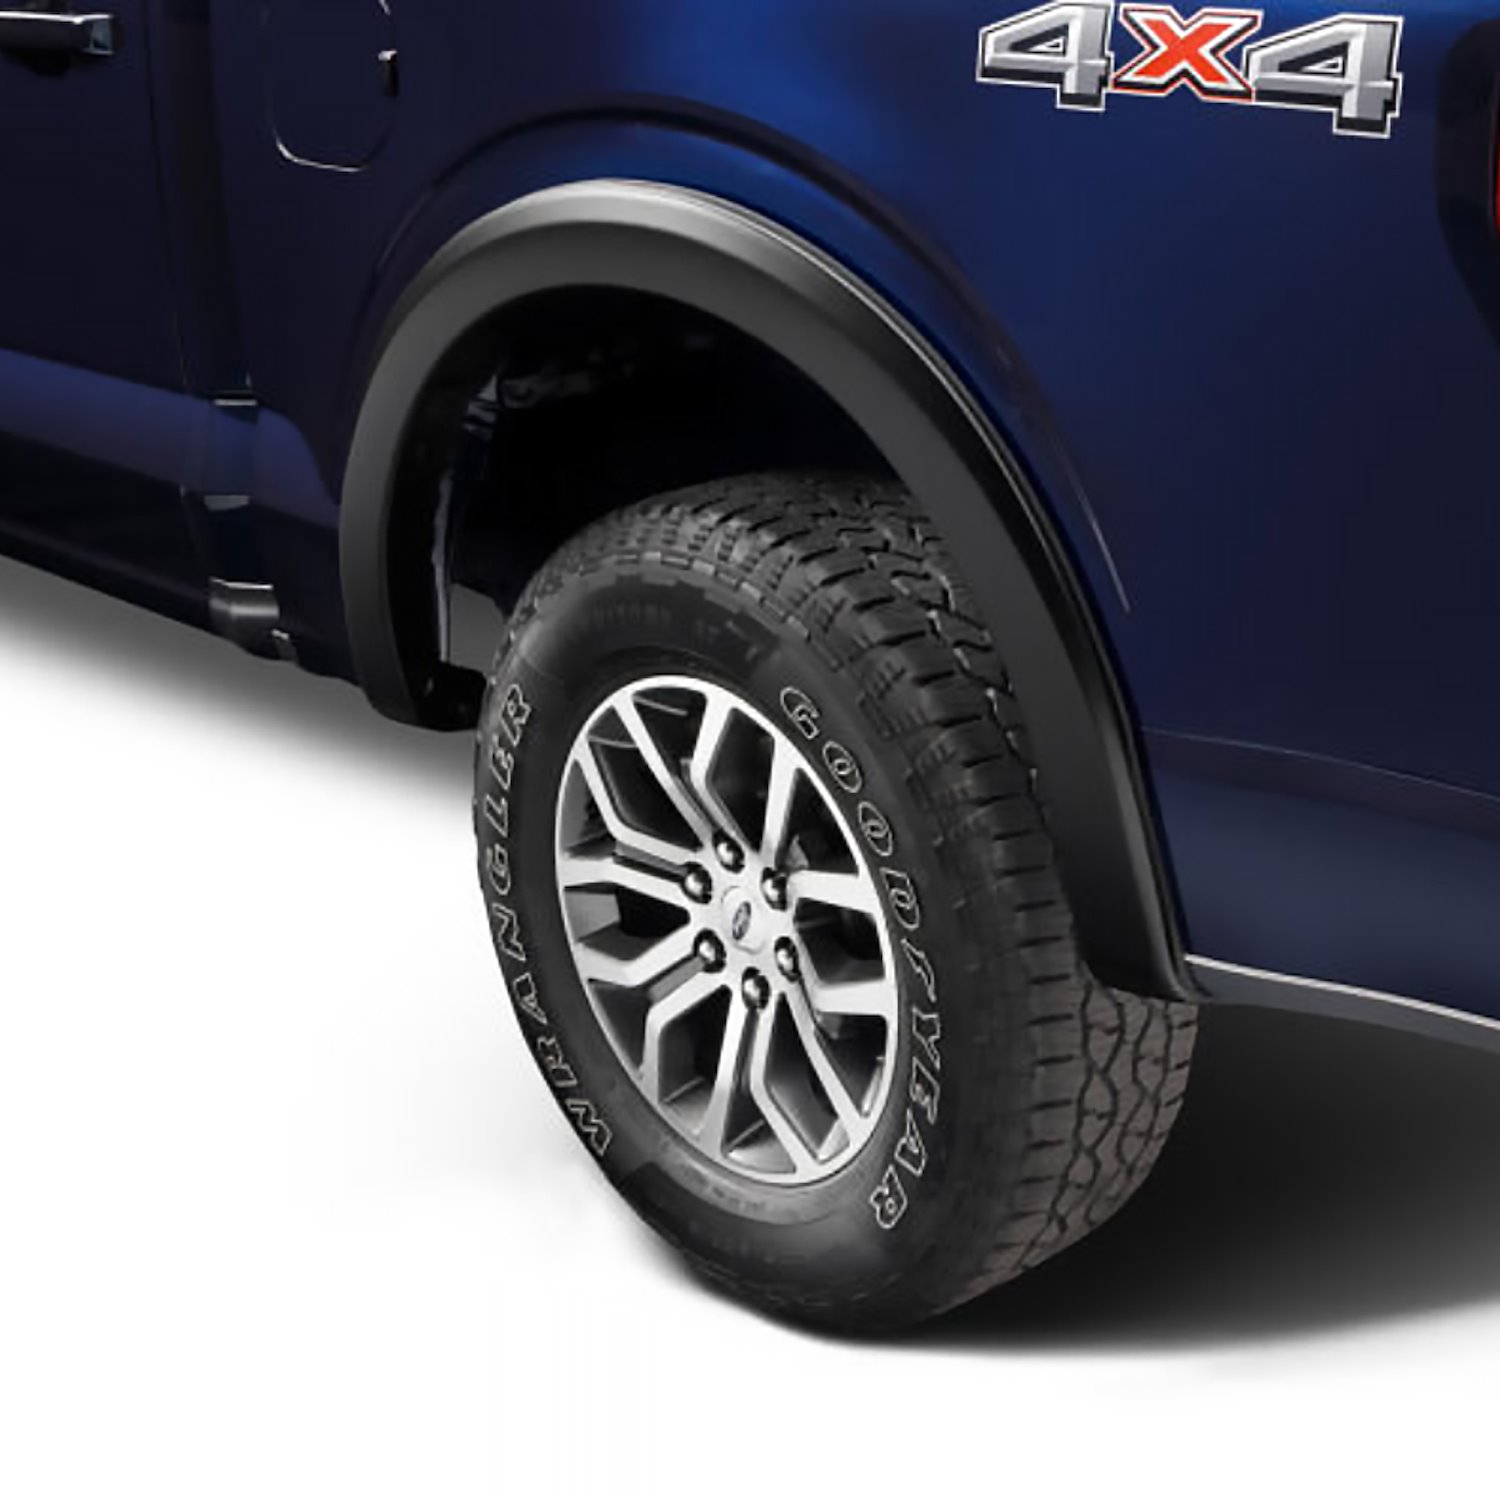 OE-Style Rear Fender Flares for Select Ford F-150 Trucks - Matte Black Smooth Finish